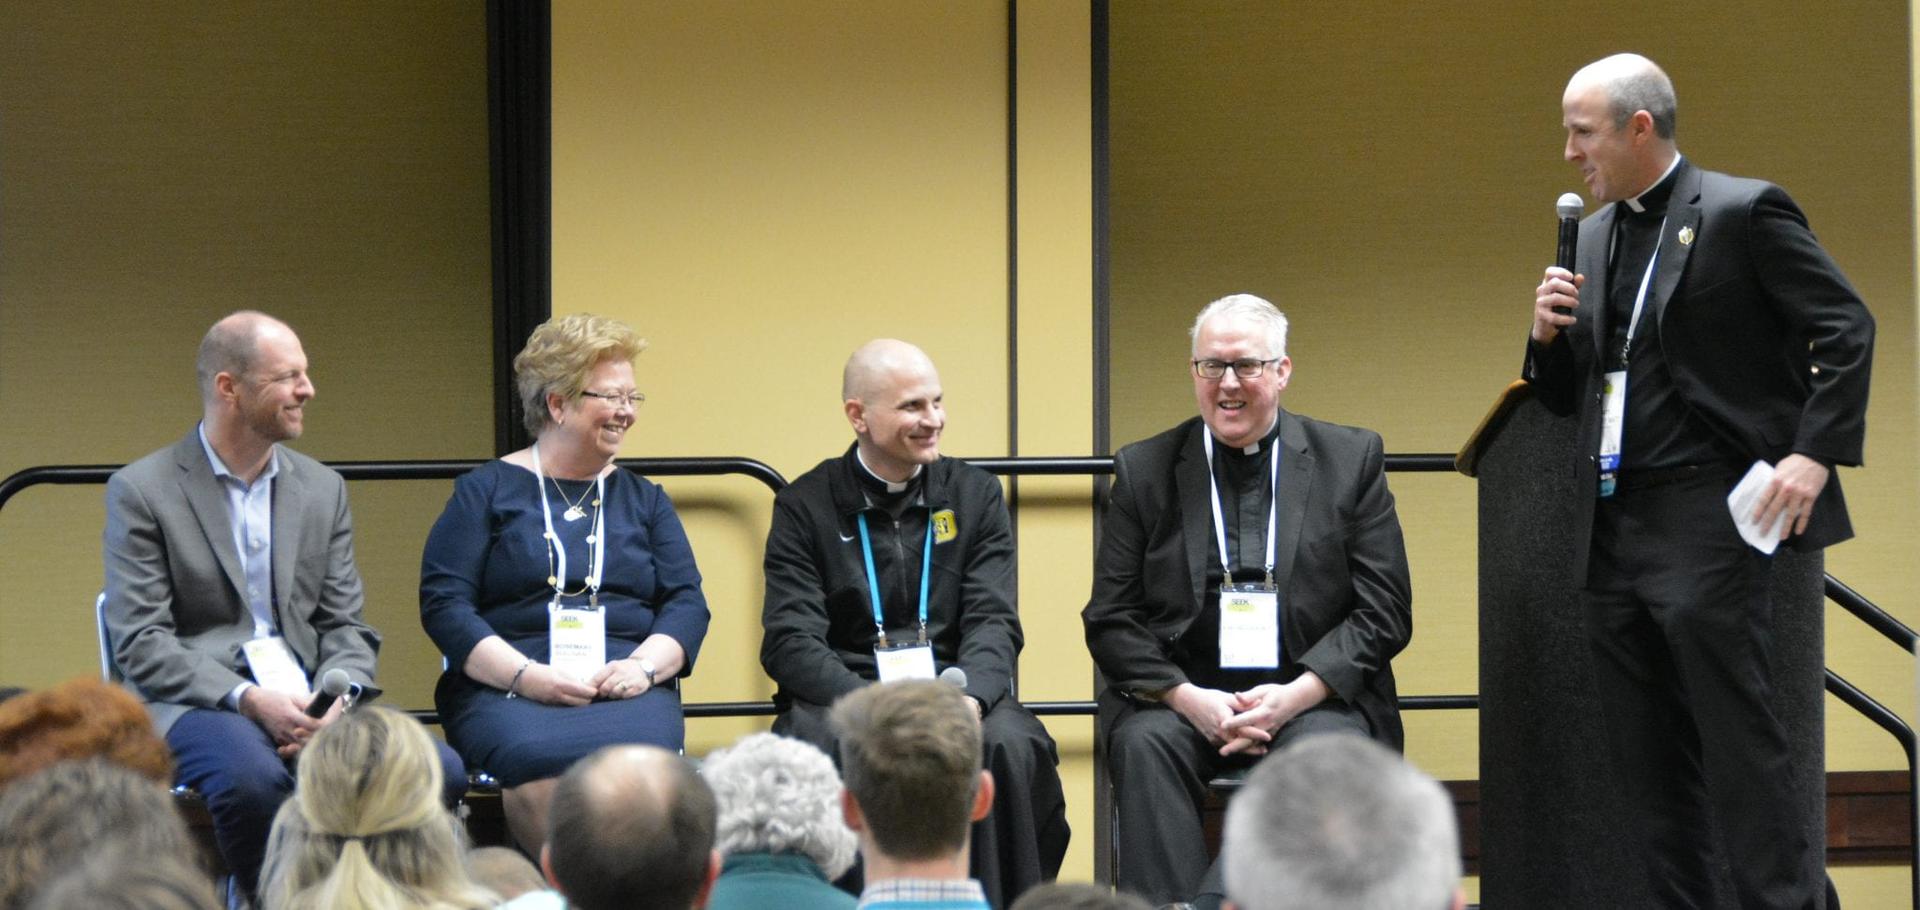 Priests laud benefits of SEEK to students, chaplains and many more